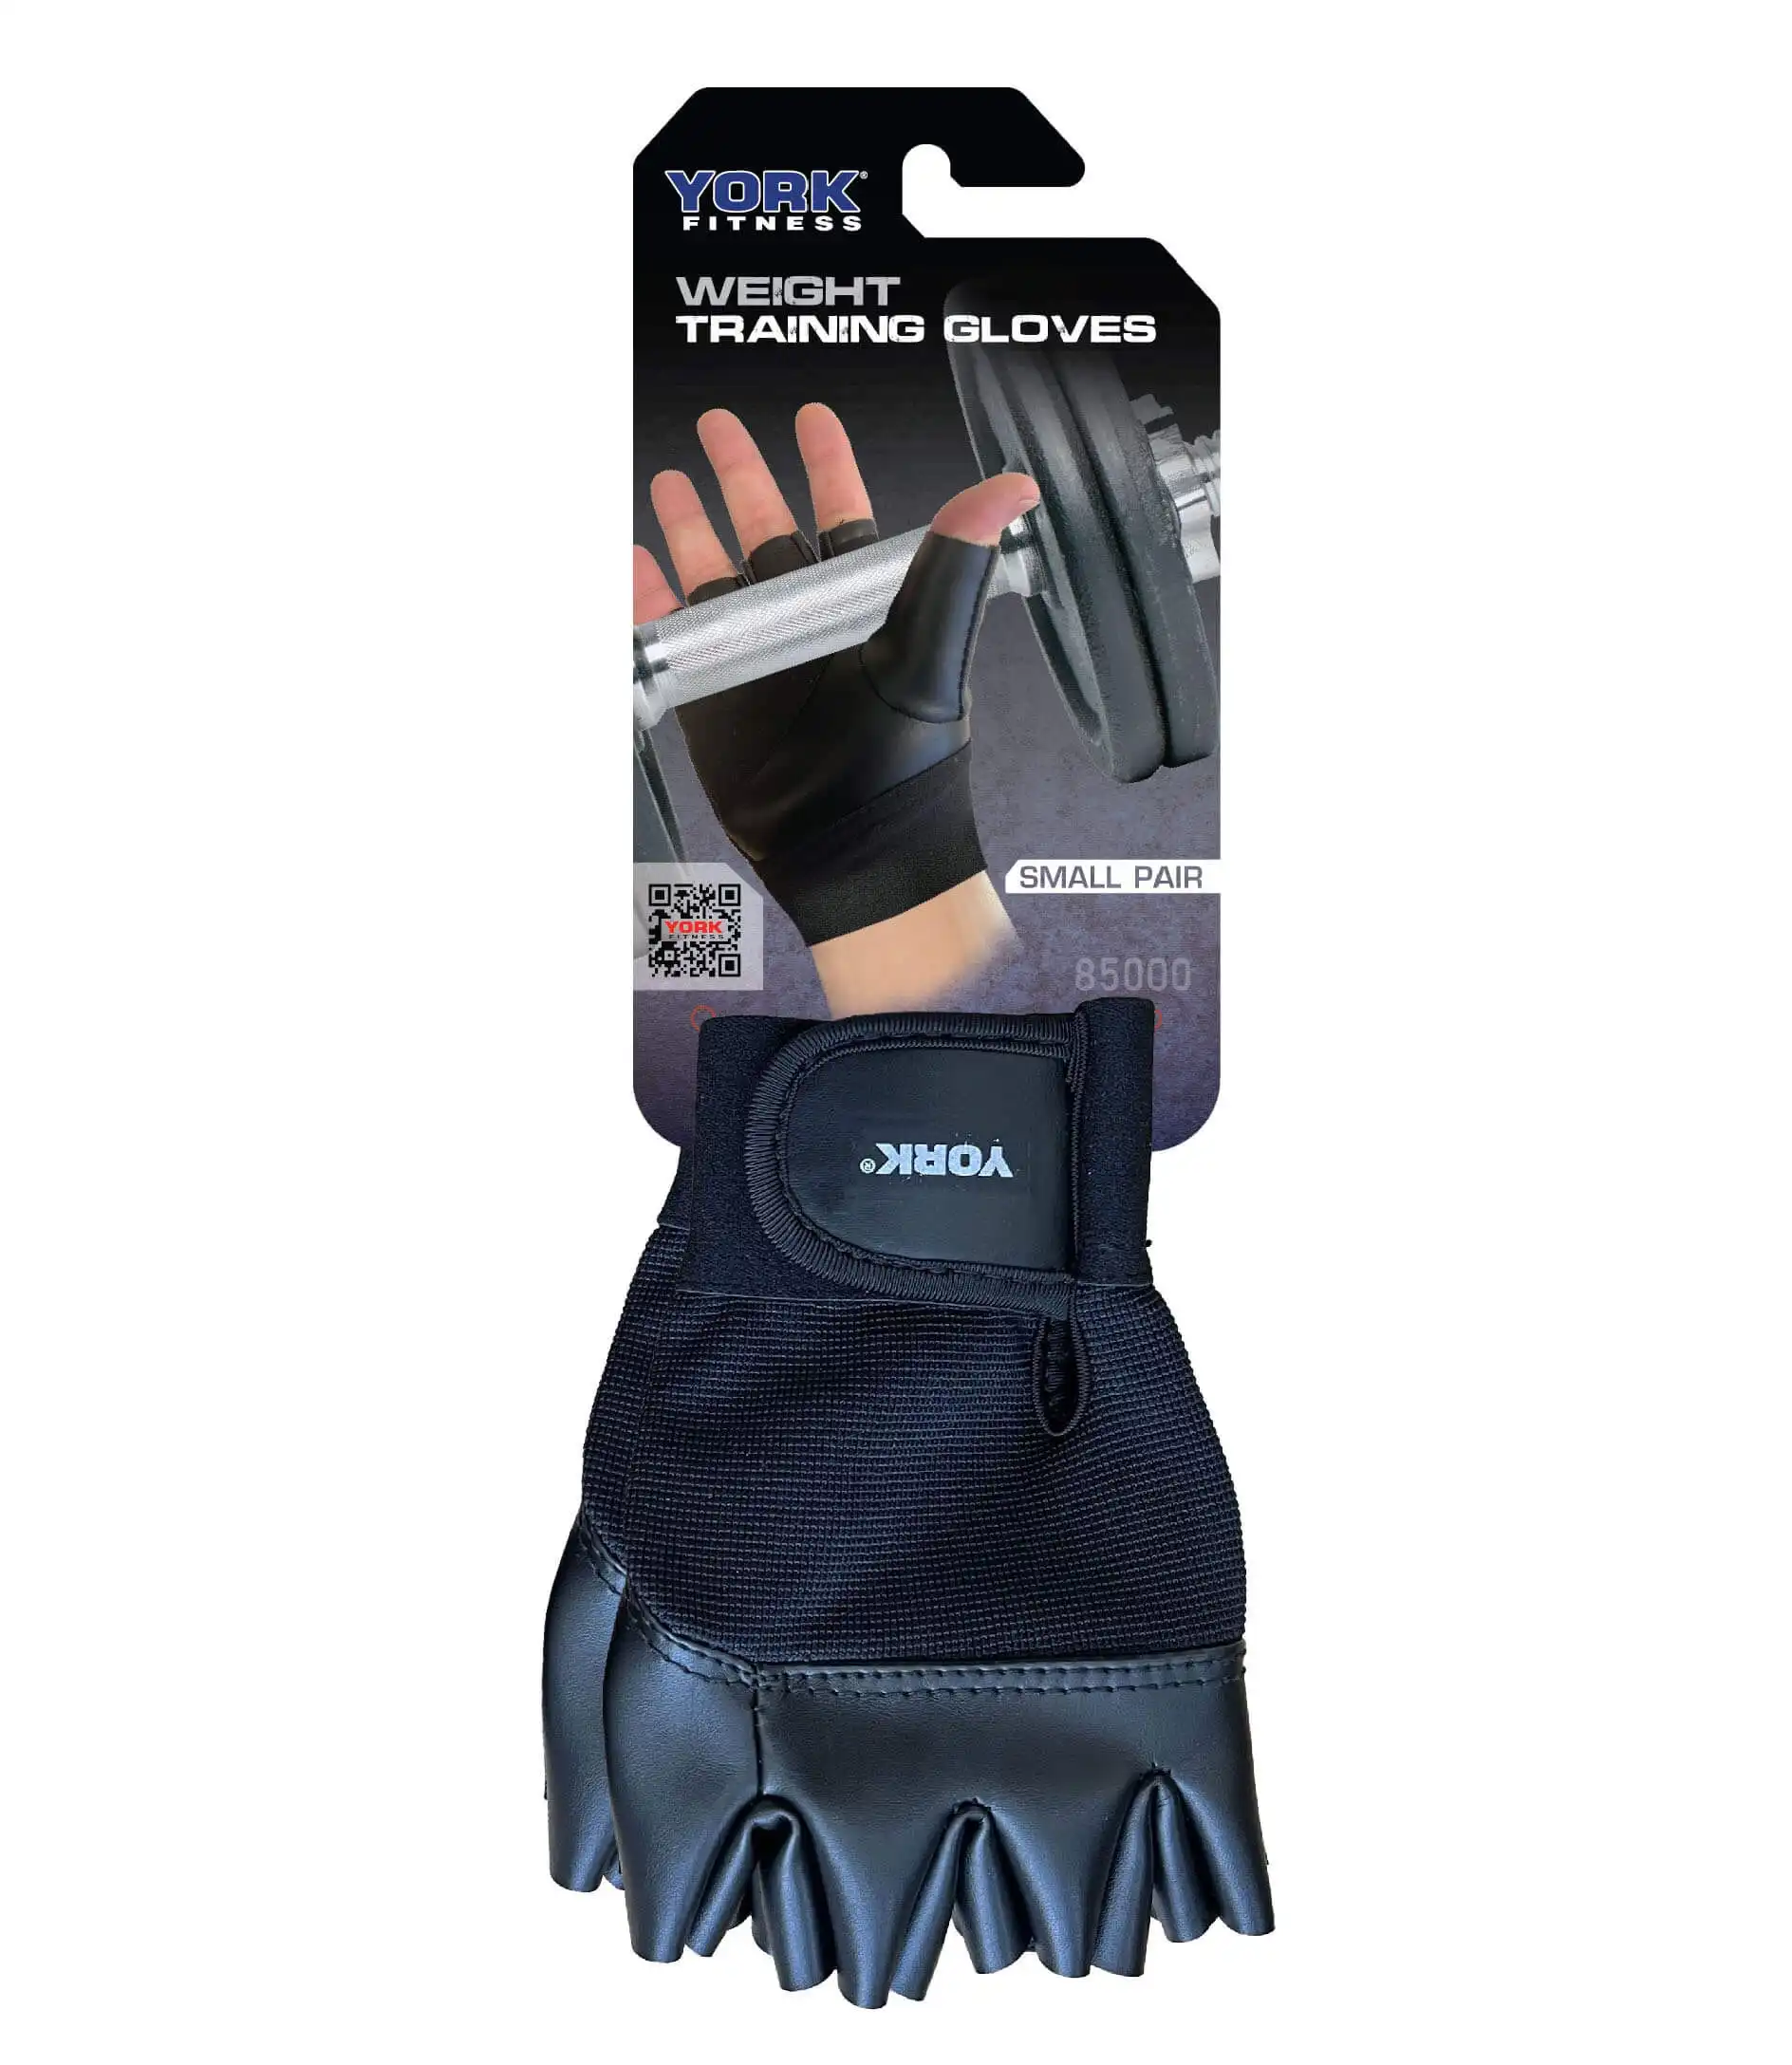 York Fitness Weight Training Gloves - Small